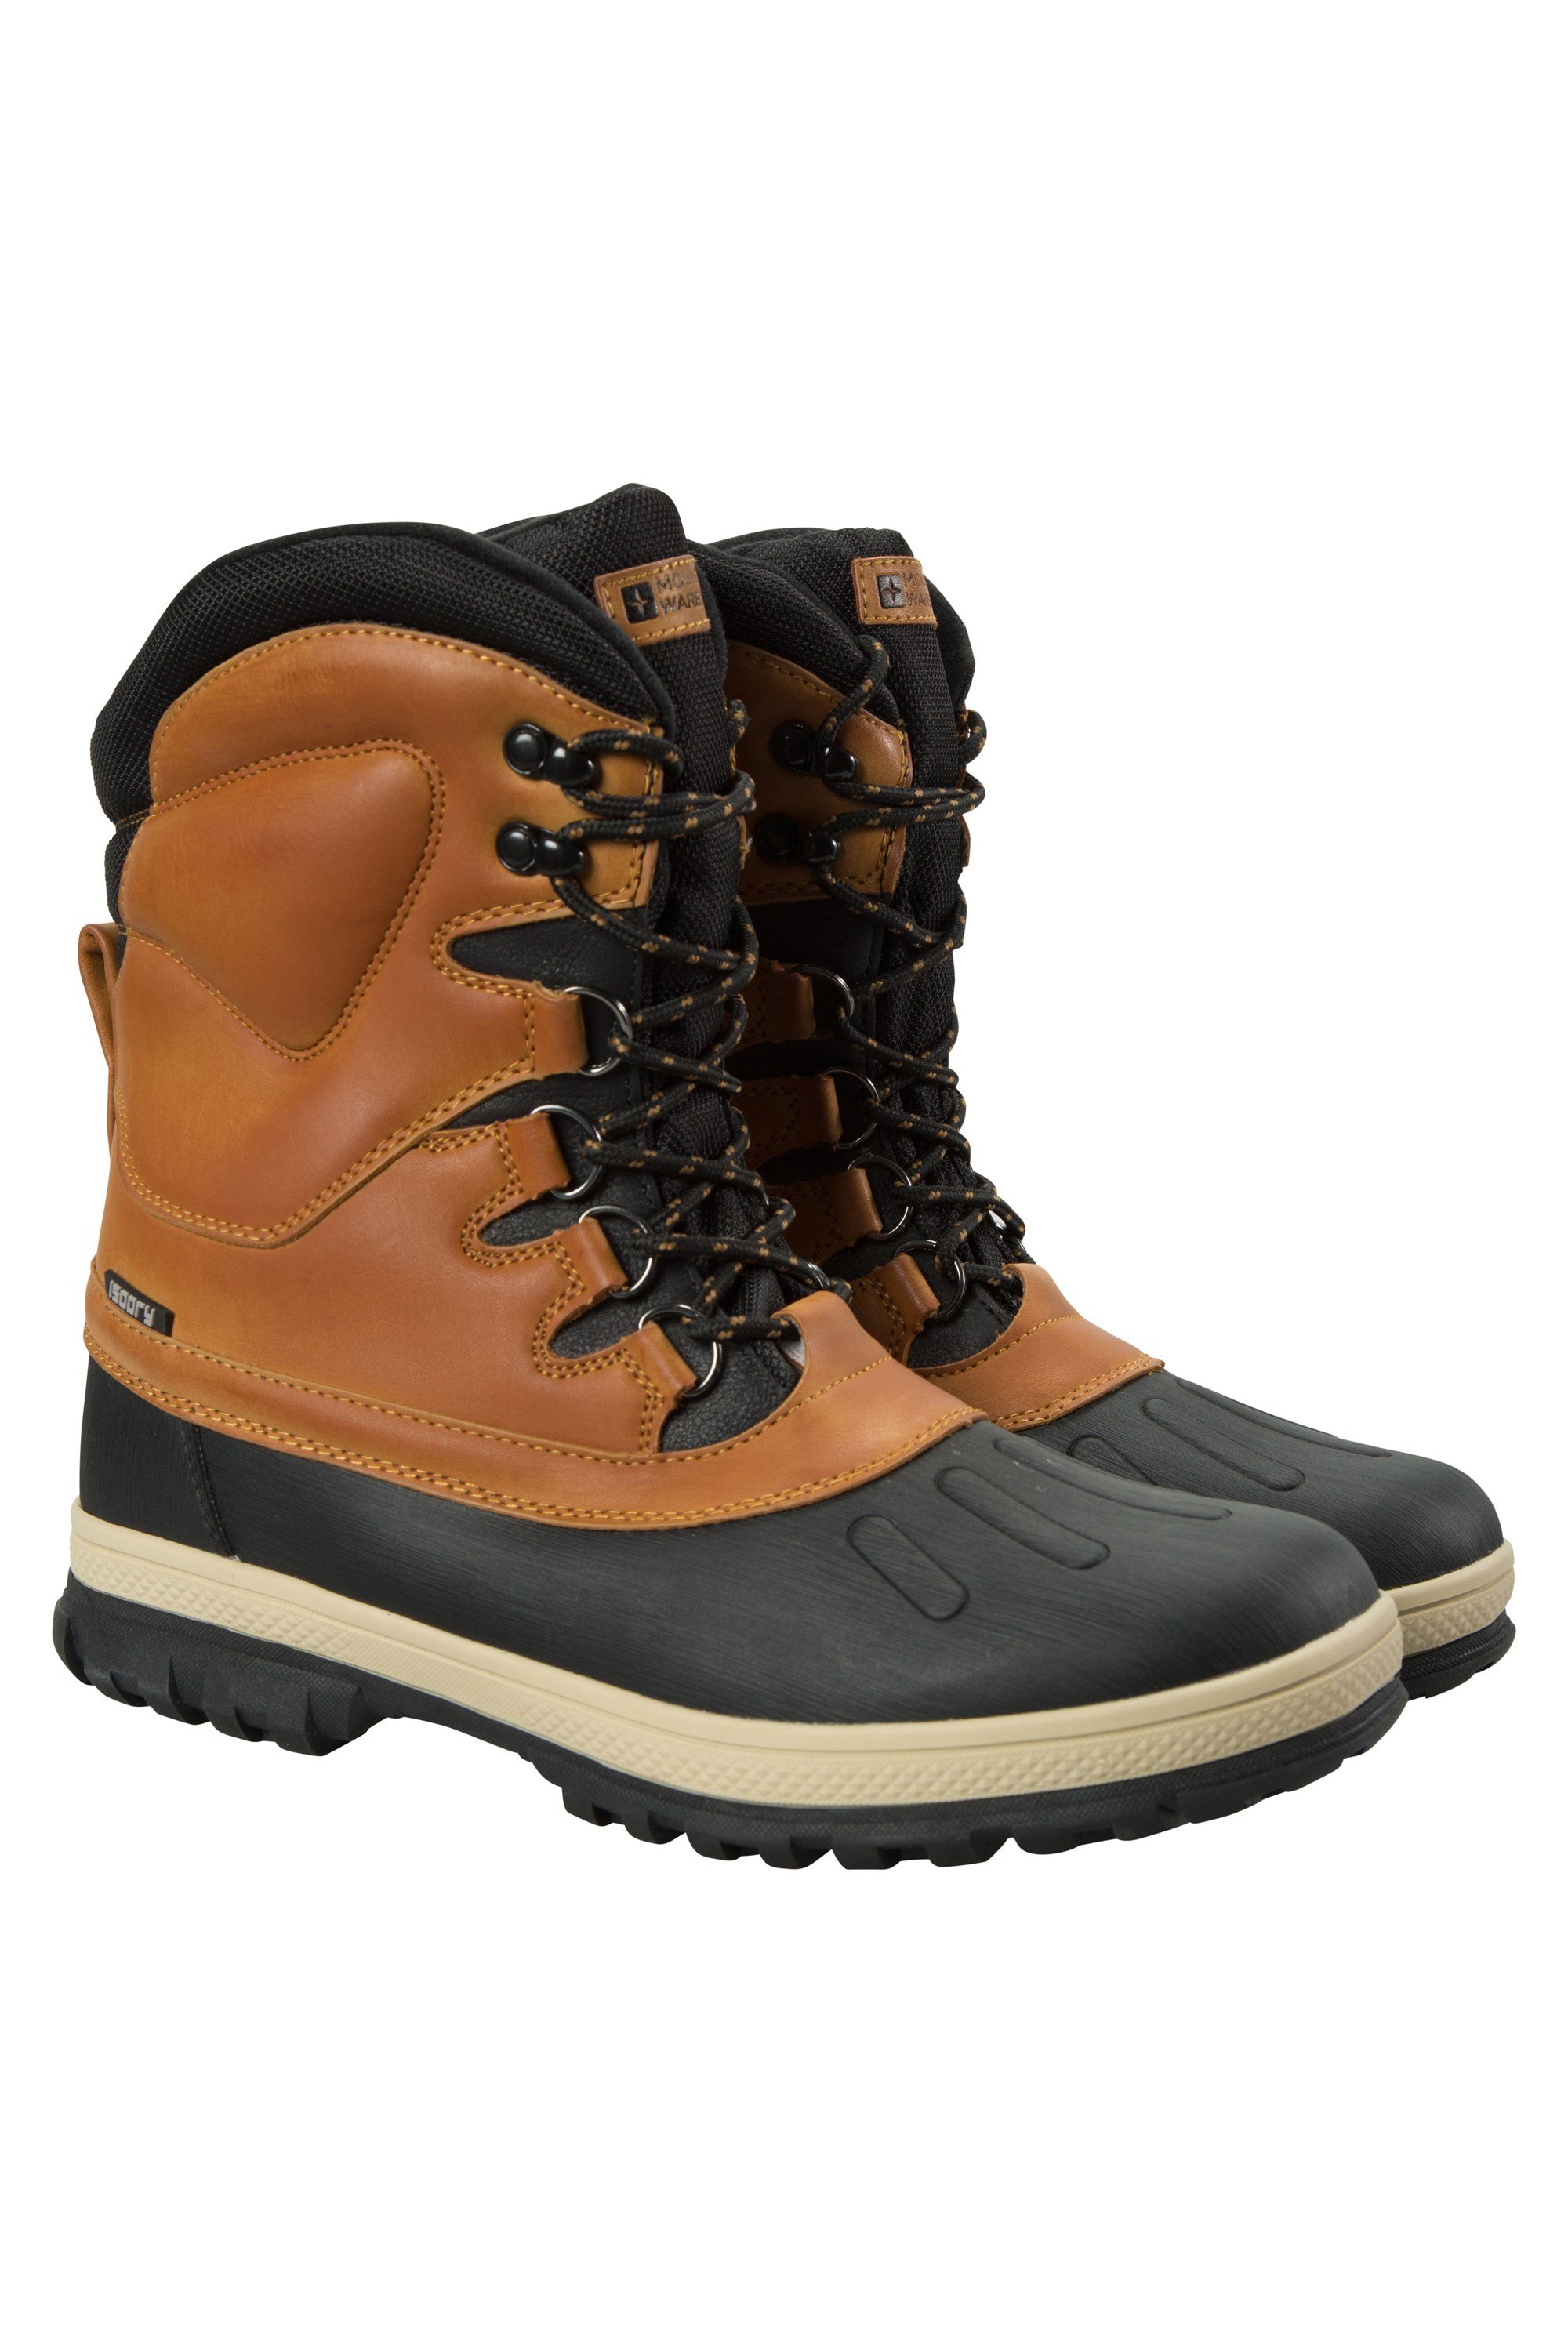 hiking snow boots mens